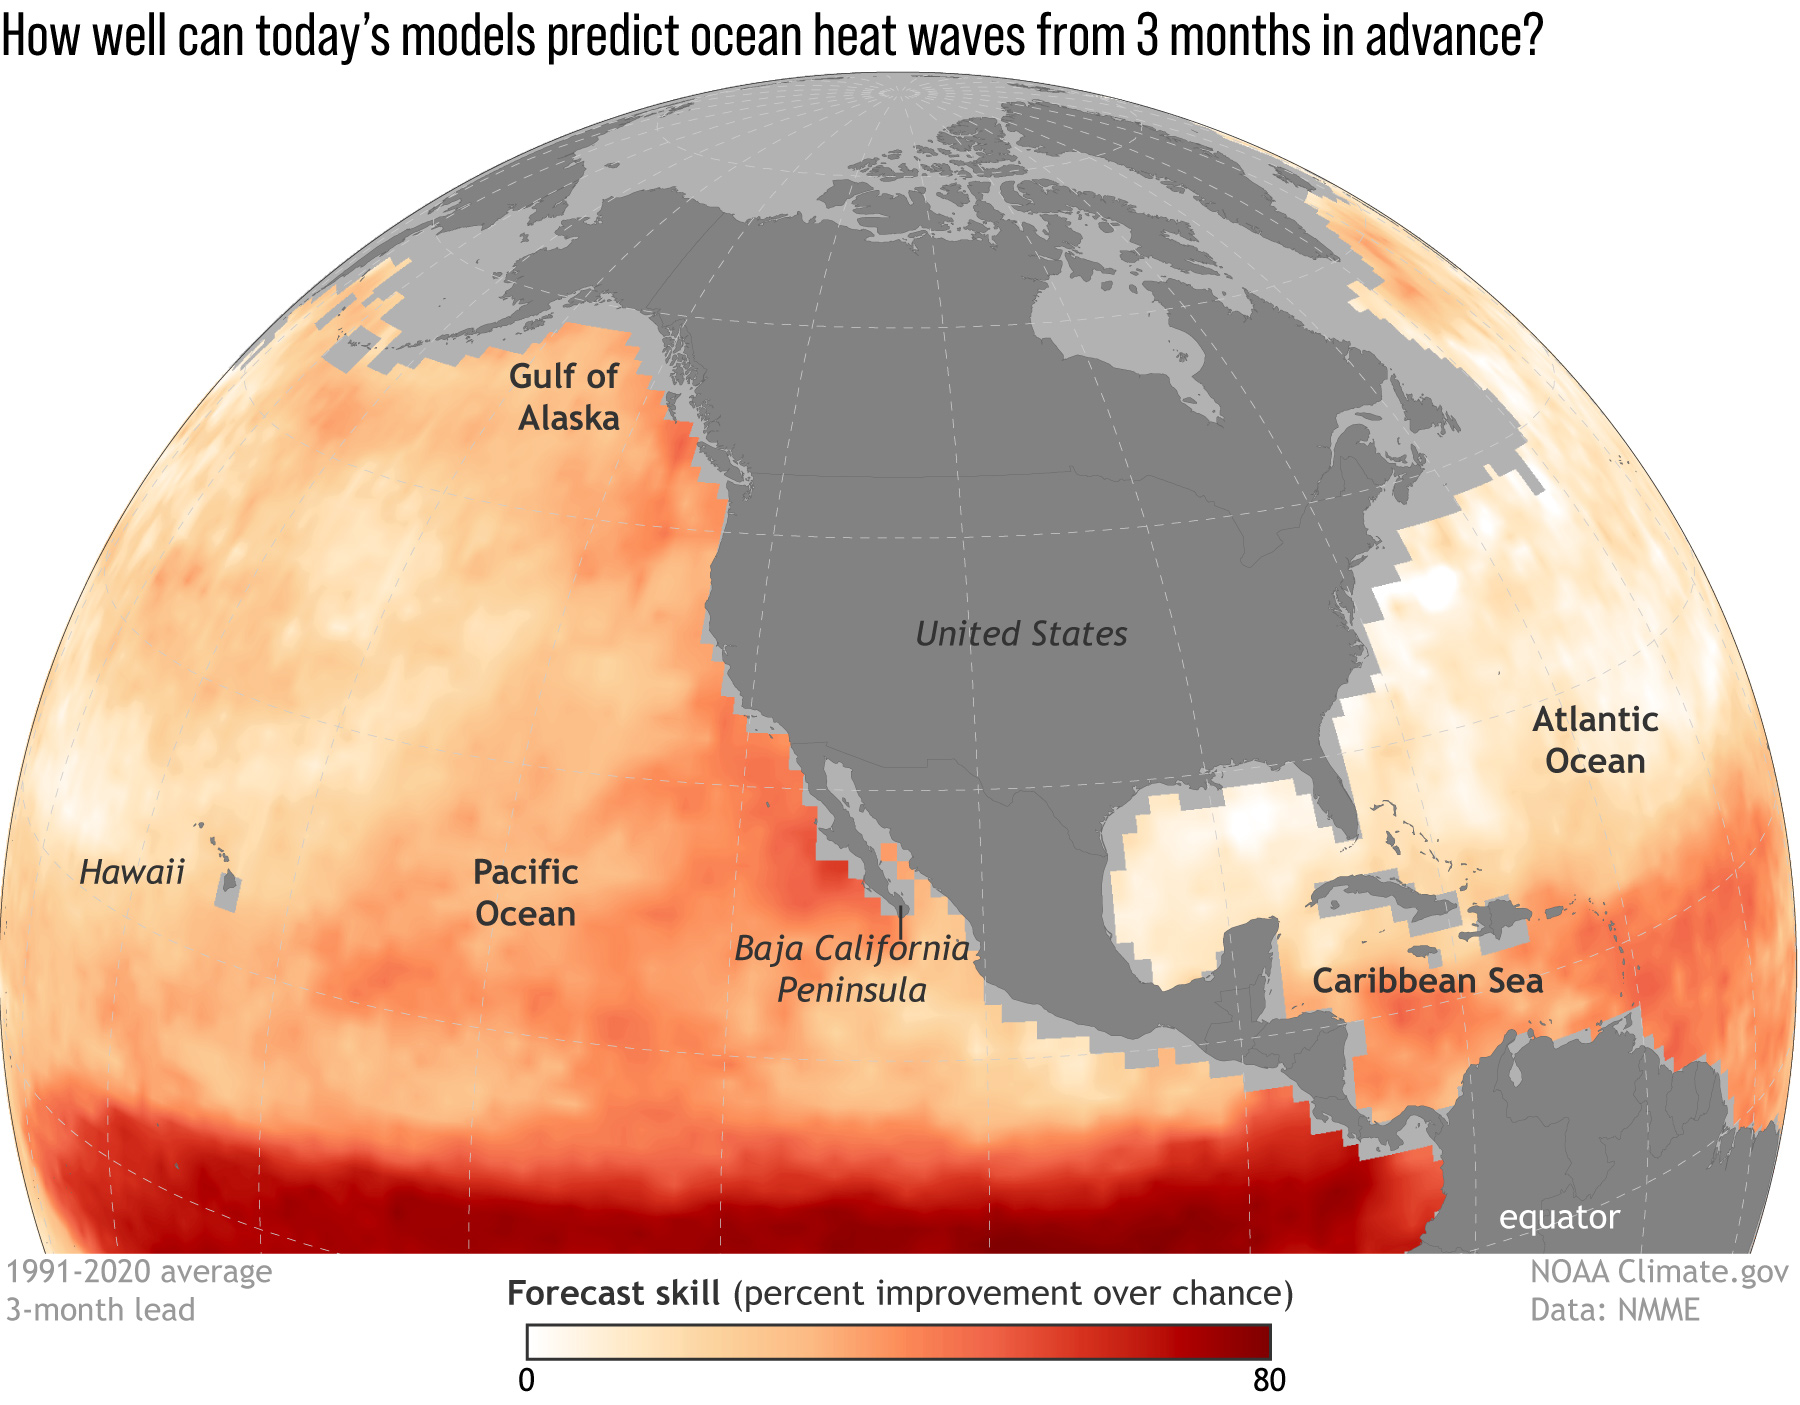 Globe-style map centered on North America showing model skill at predicting ocean heat waves 3 months in advance